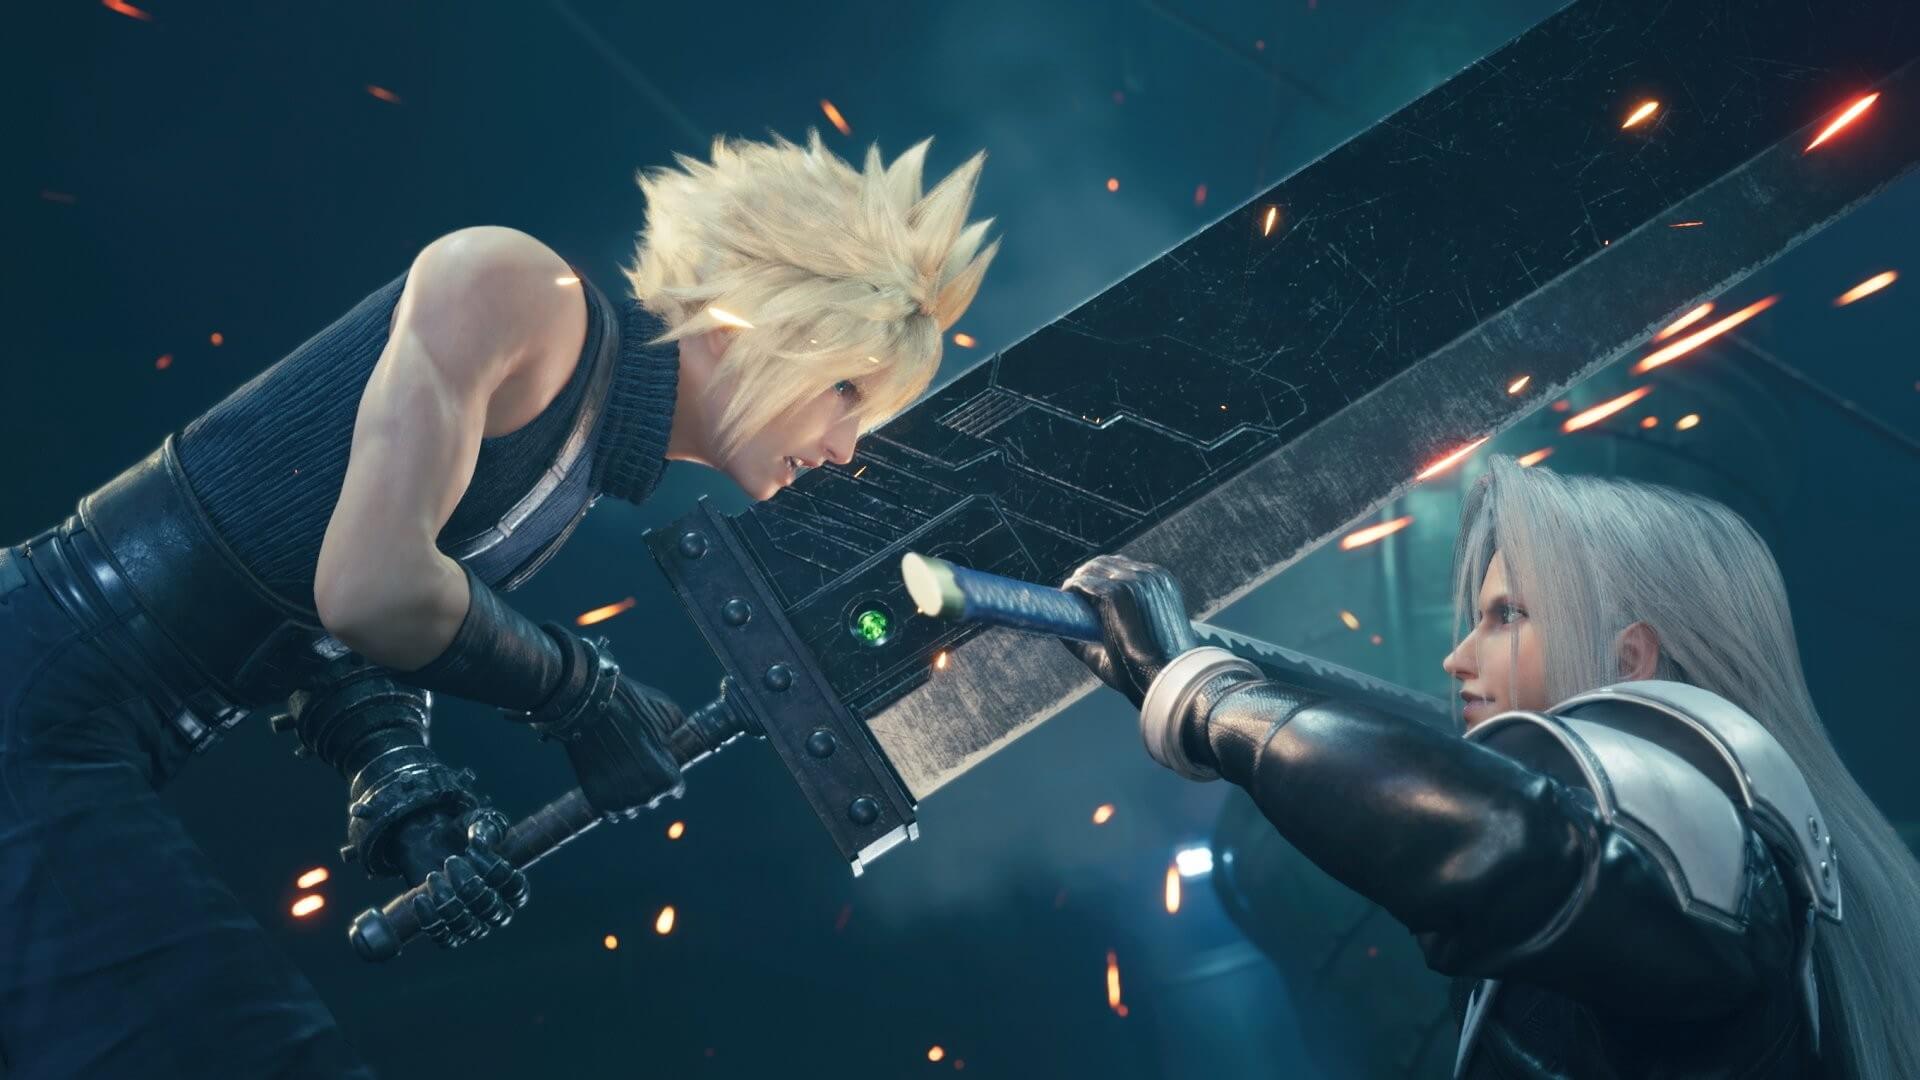 Final Fantasy VII Remake 1st Class Edition is Back